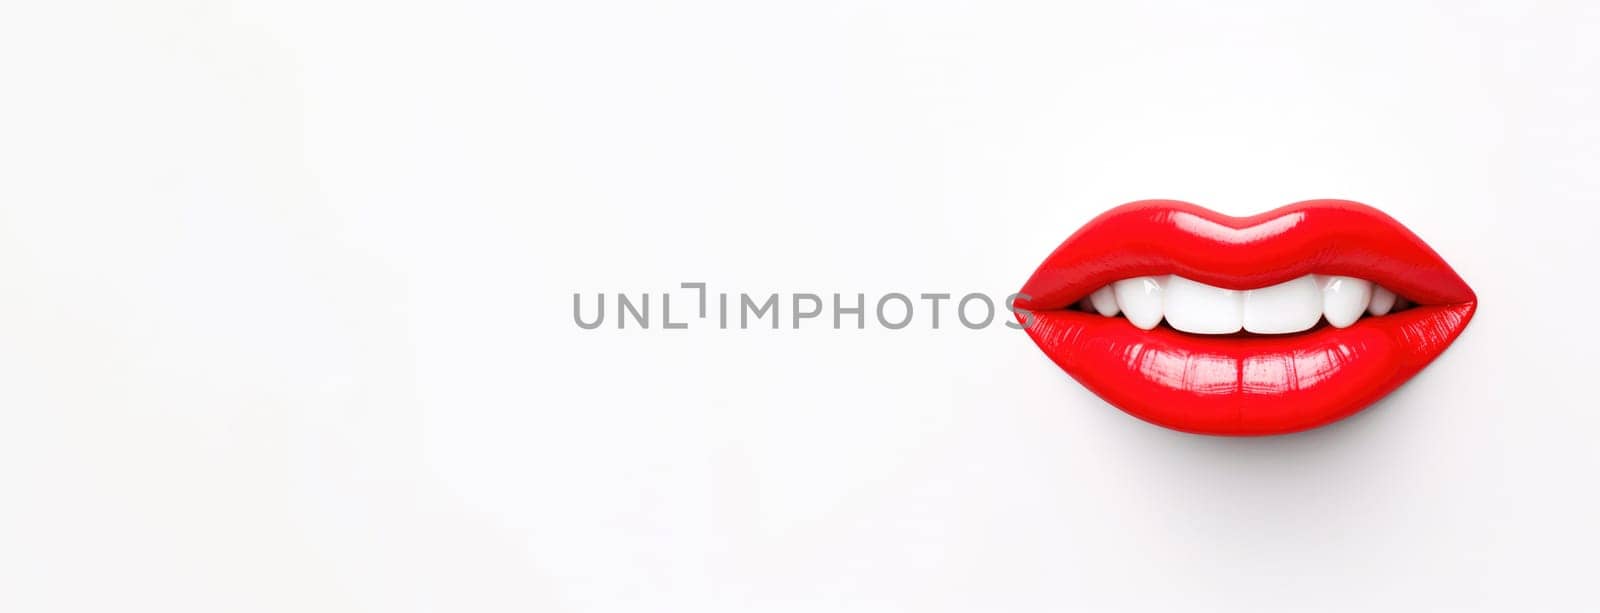 Banner of 3D realistic smiling glossy red lips on white. cosmetic, fashion, and romantic designs. Open mouth with teeth, lipstick promotion. by JuliaDorian